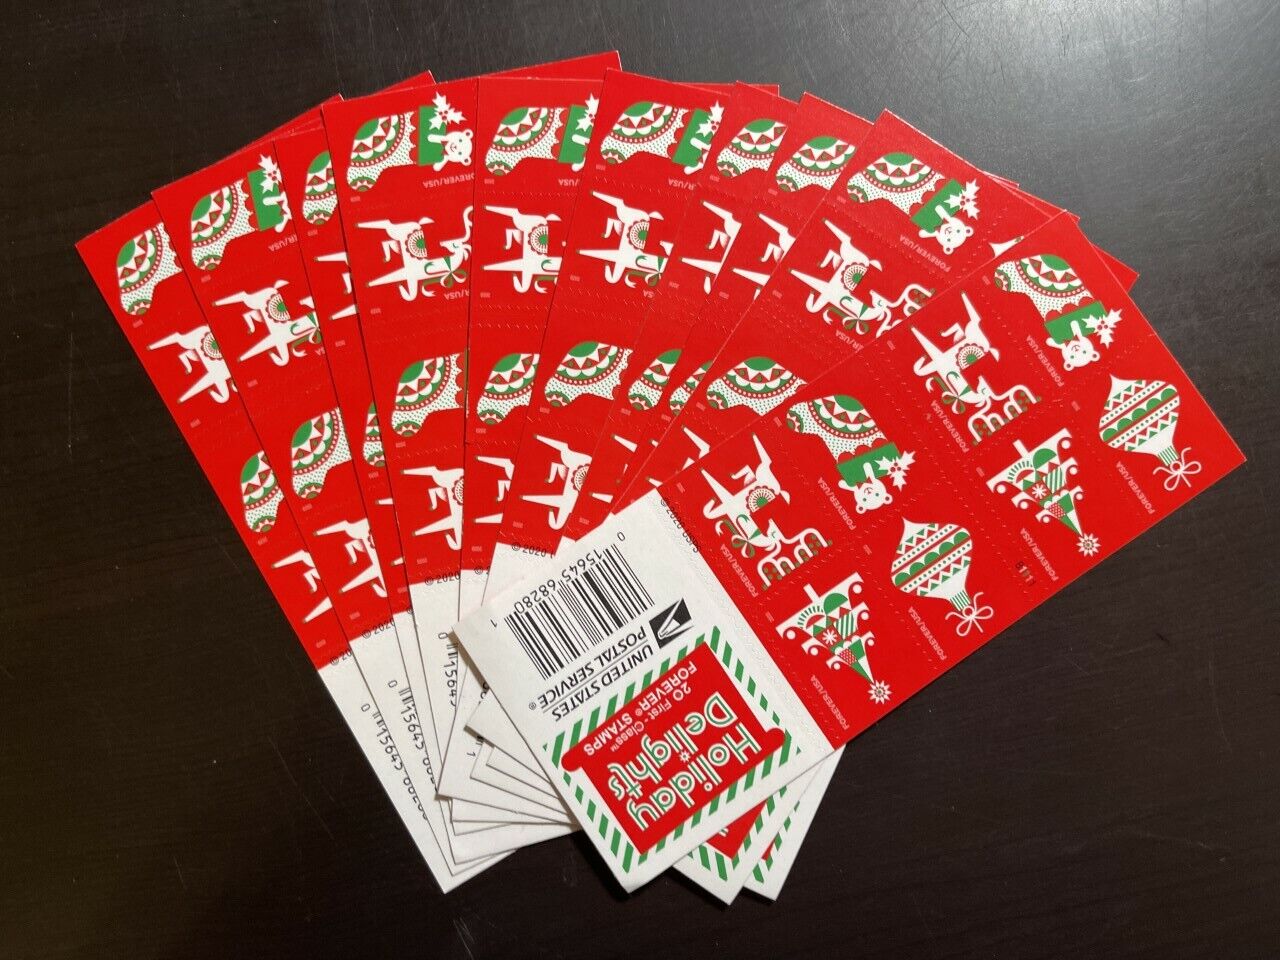 Christmas Stamps (USPS Postage Stamps for Holiday Mail)